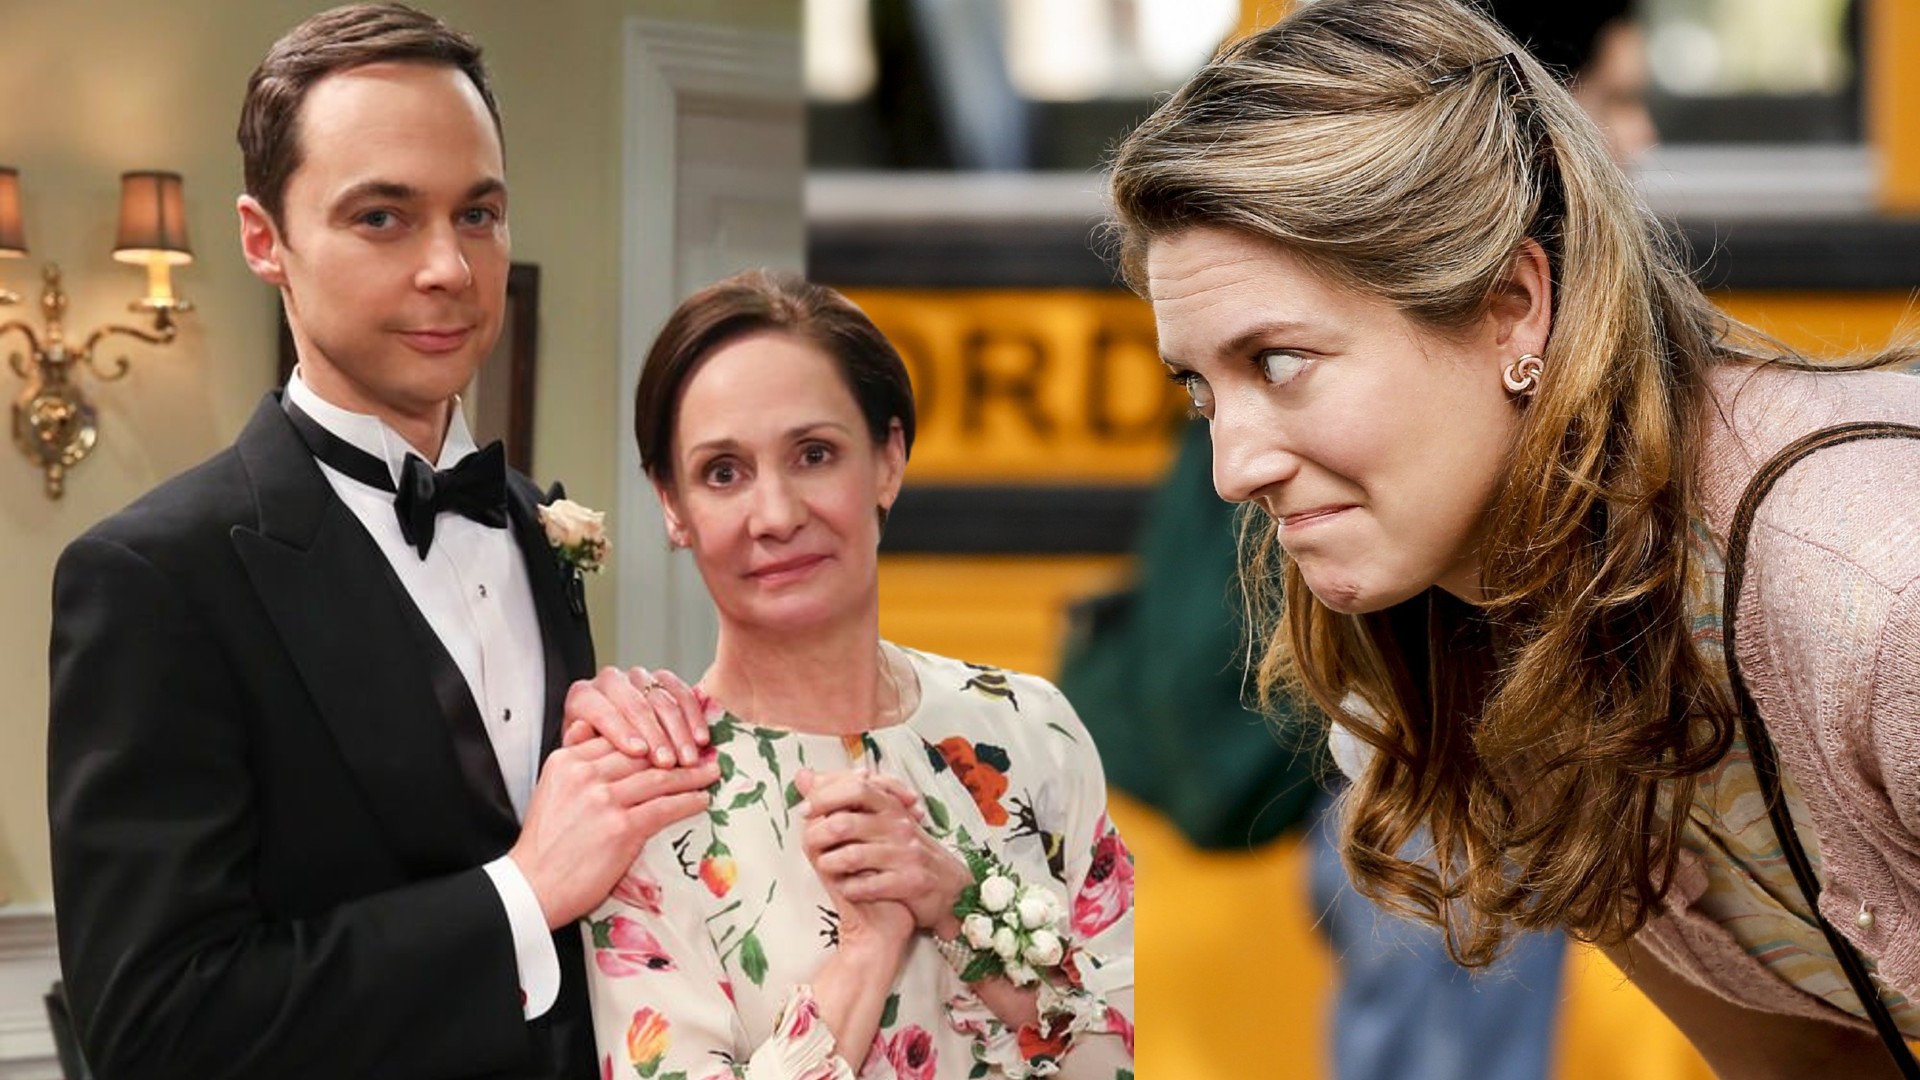 TBBT's Mary Was Way More Bitter Than Young Sheldon's, and We Why